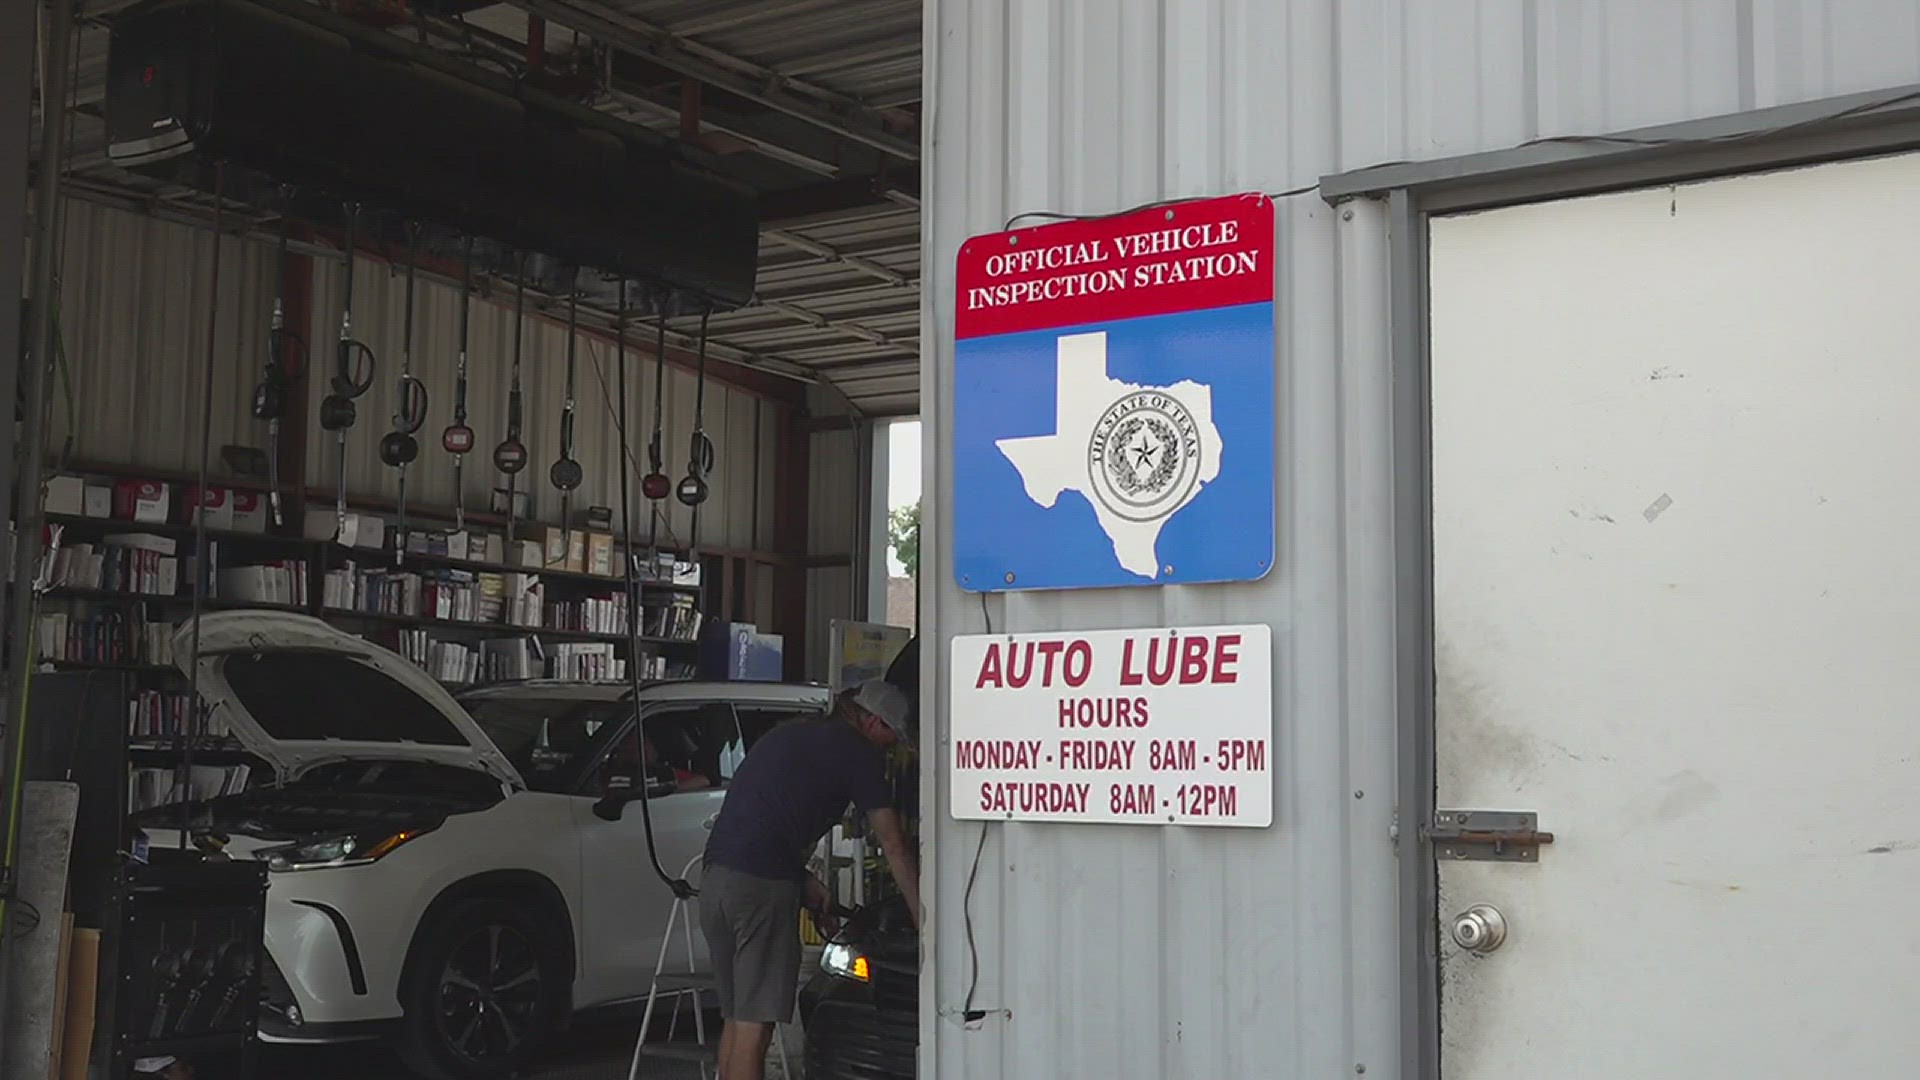 Owner of Auto Lube in Vidor, Brandon Bearden says they do about 30 to 40 inspections a day. Annual check-ups are a huge part of his business.